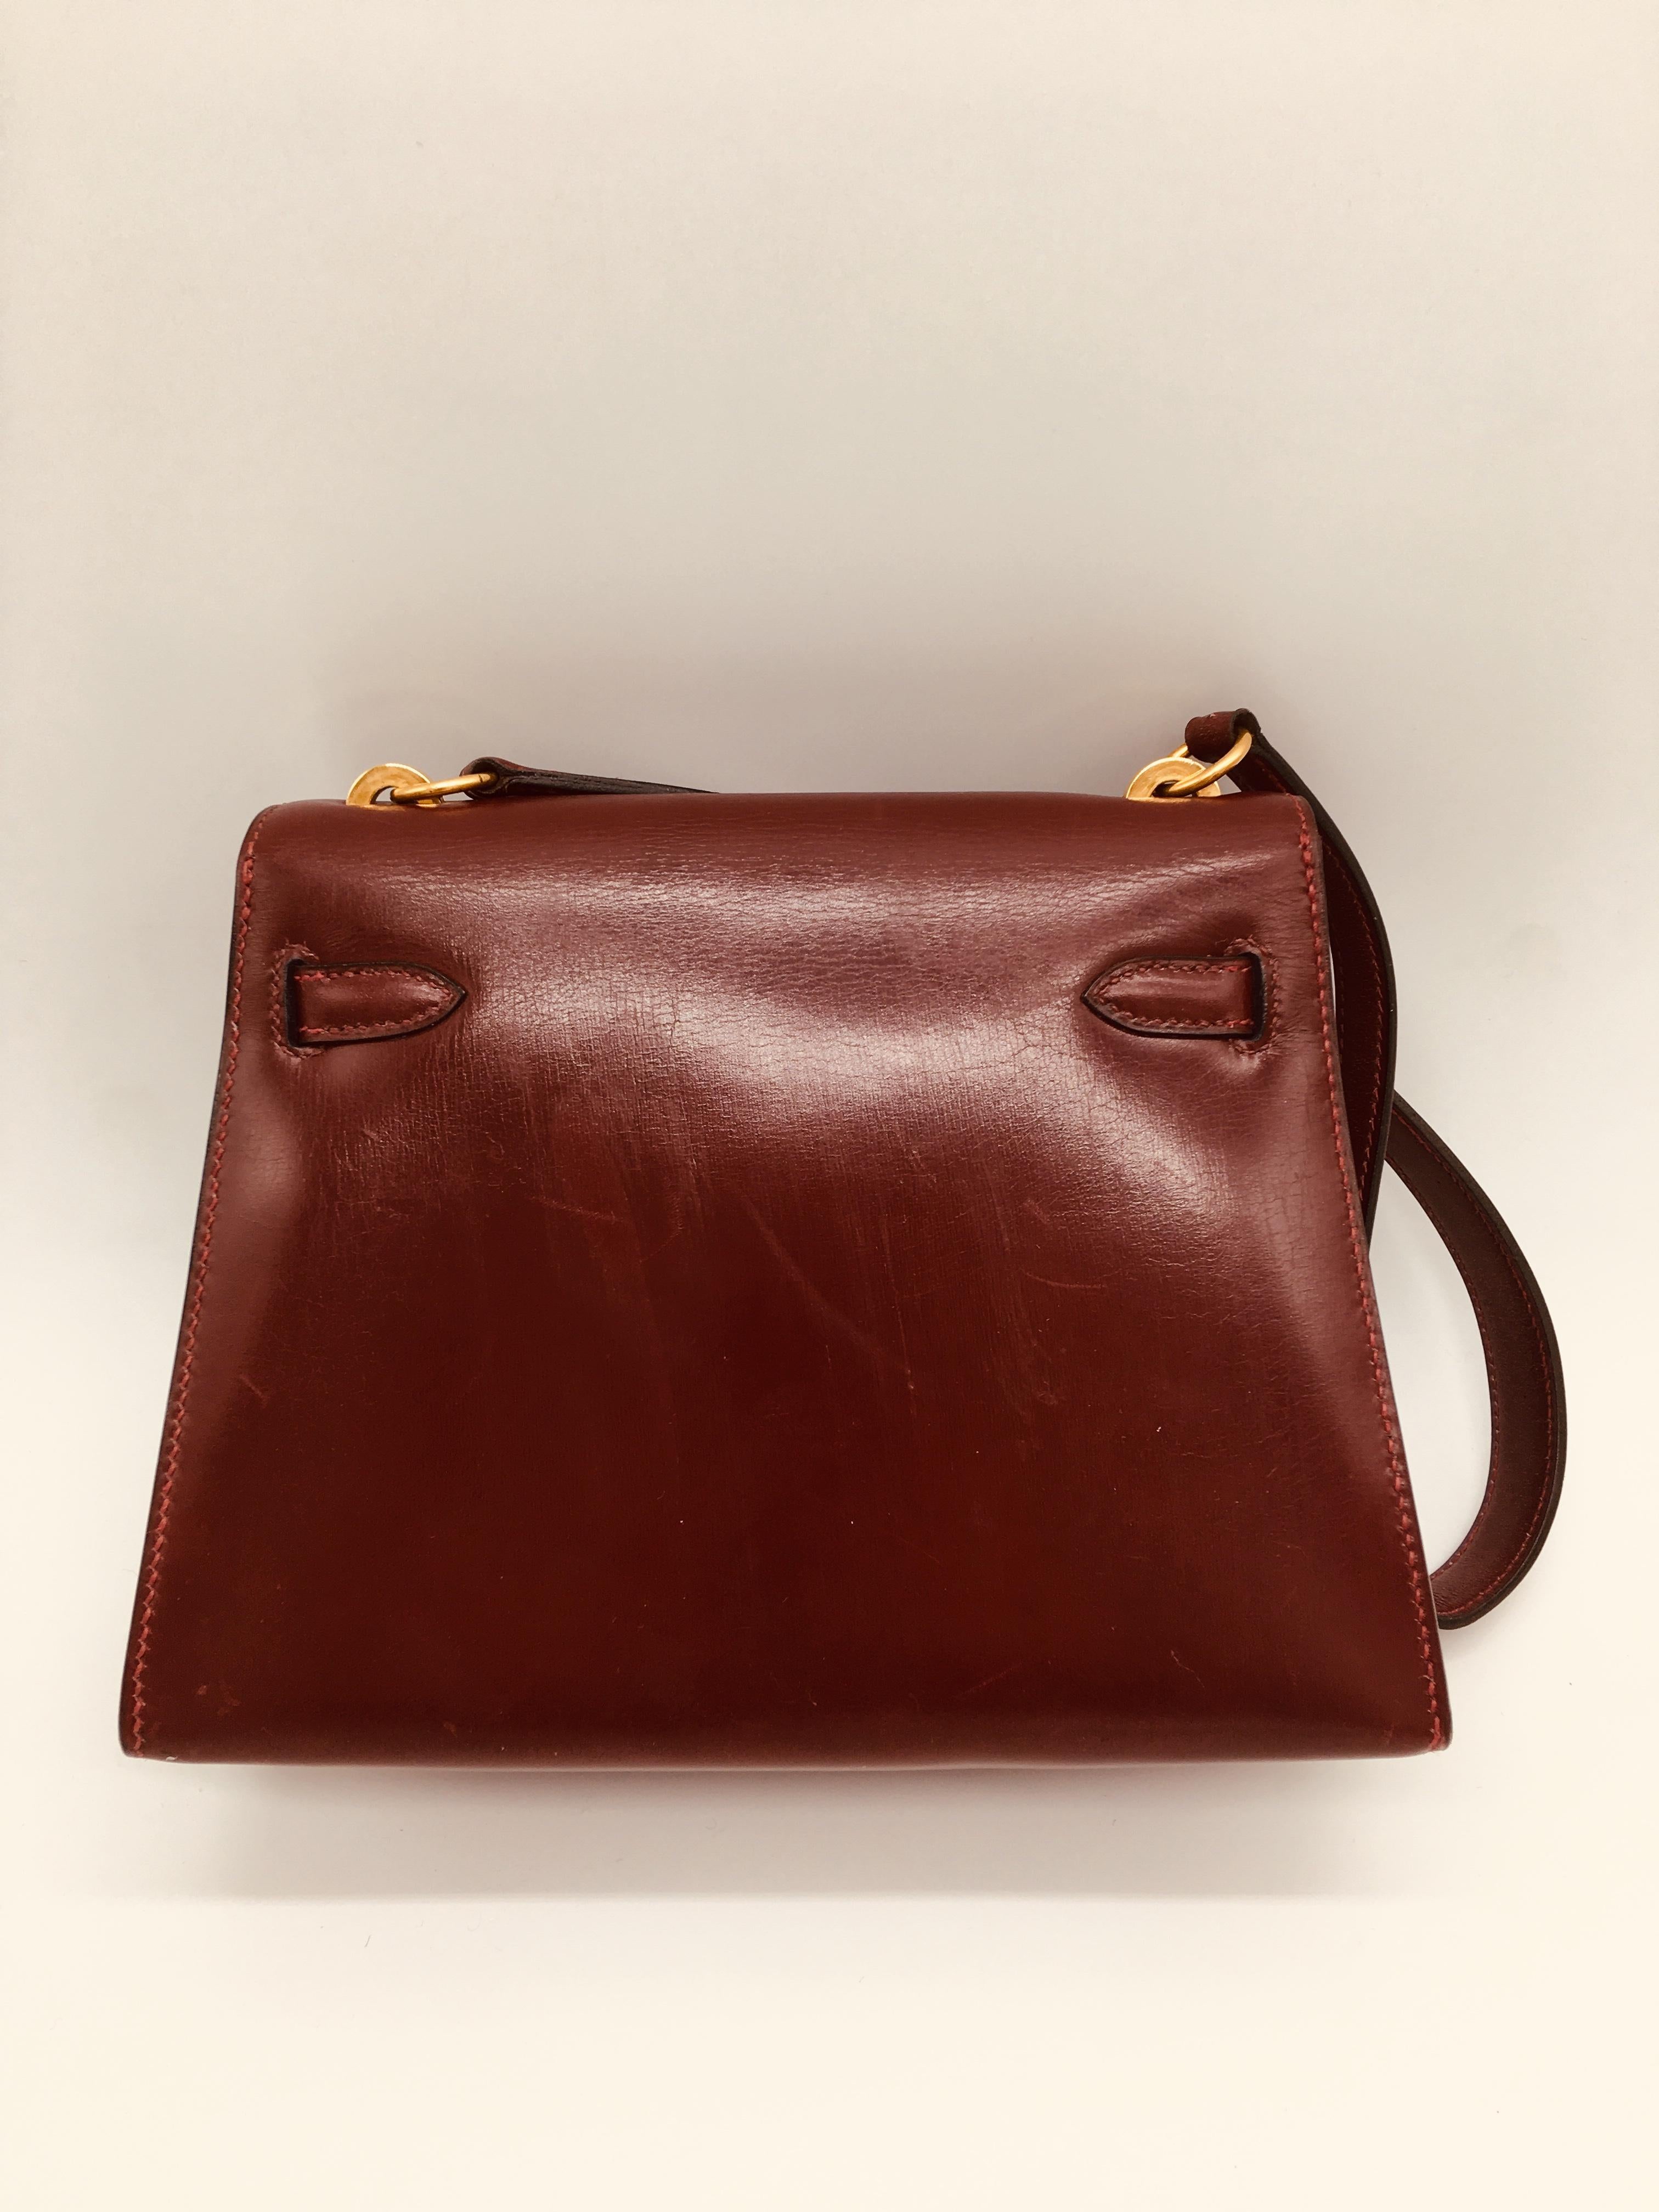 A beautiful Vintage Kelly in classic Rouge H, this Mini Kelly is a perfect evening bag, but still has enough room to accommodate our modern requirements, including smart phones for use during the day.  At 30 years old this is a true vintage piece. 